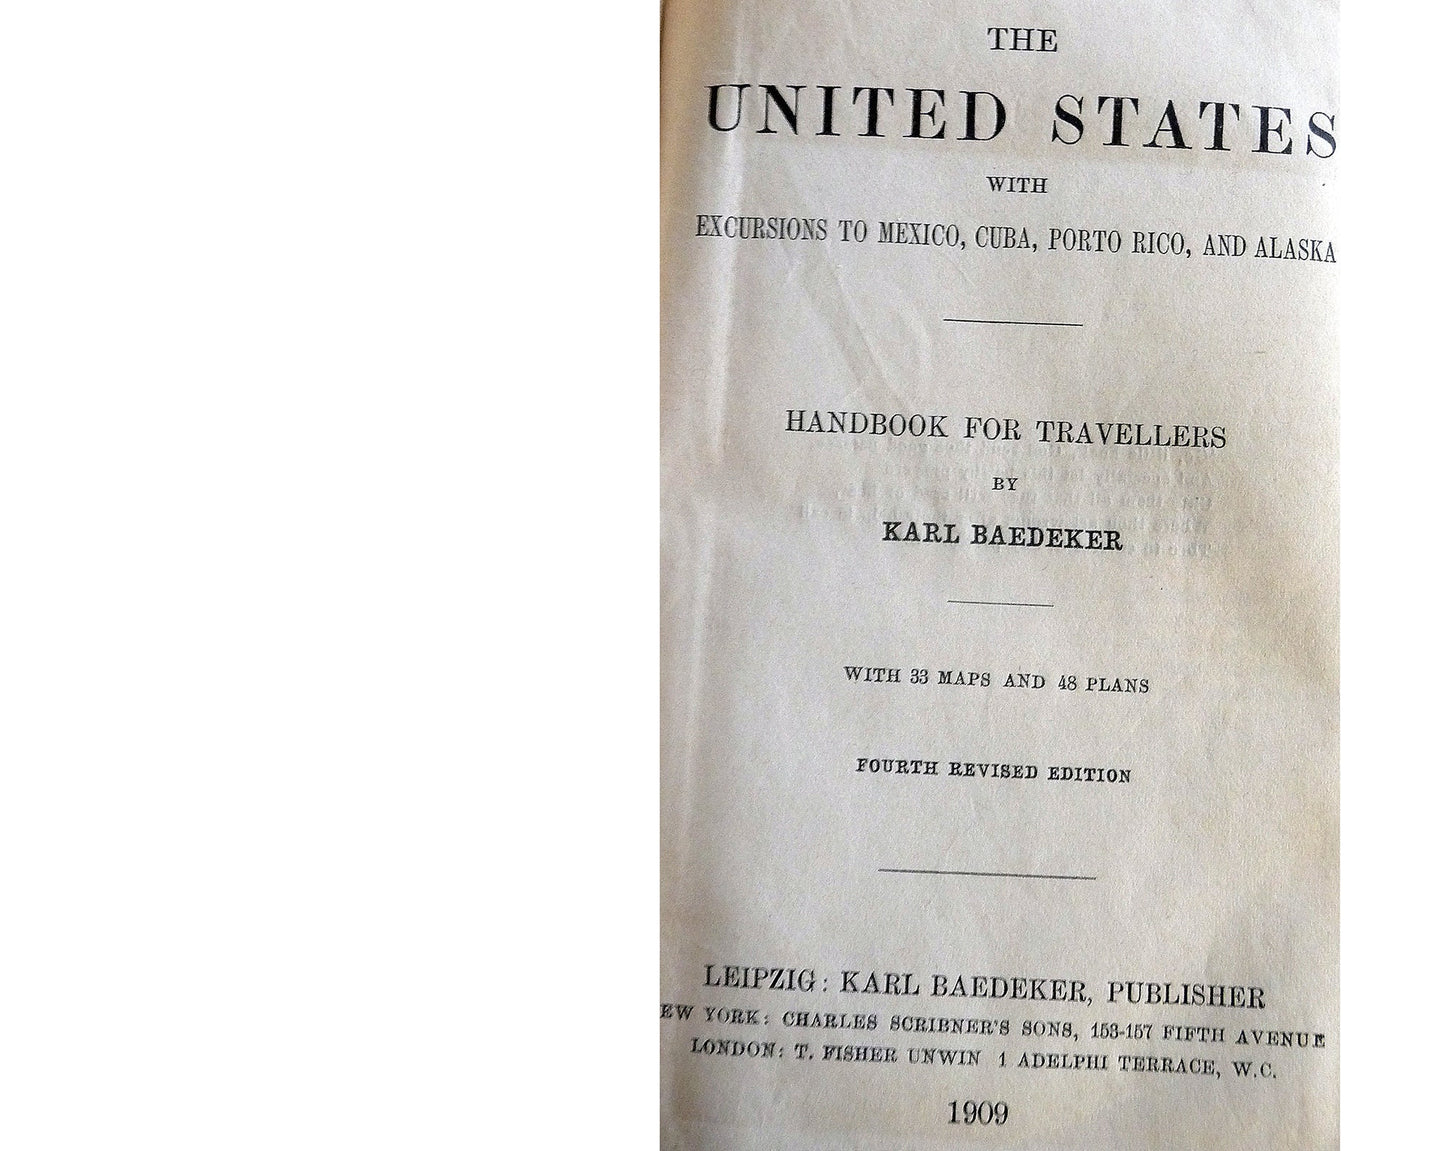 1909 Baedecker?s United States tour guide - Excellent condition!